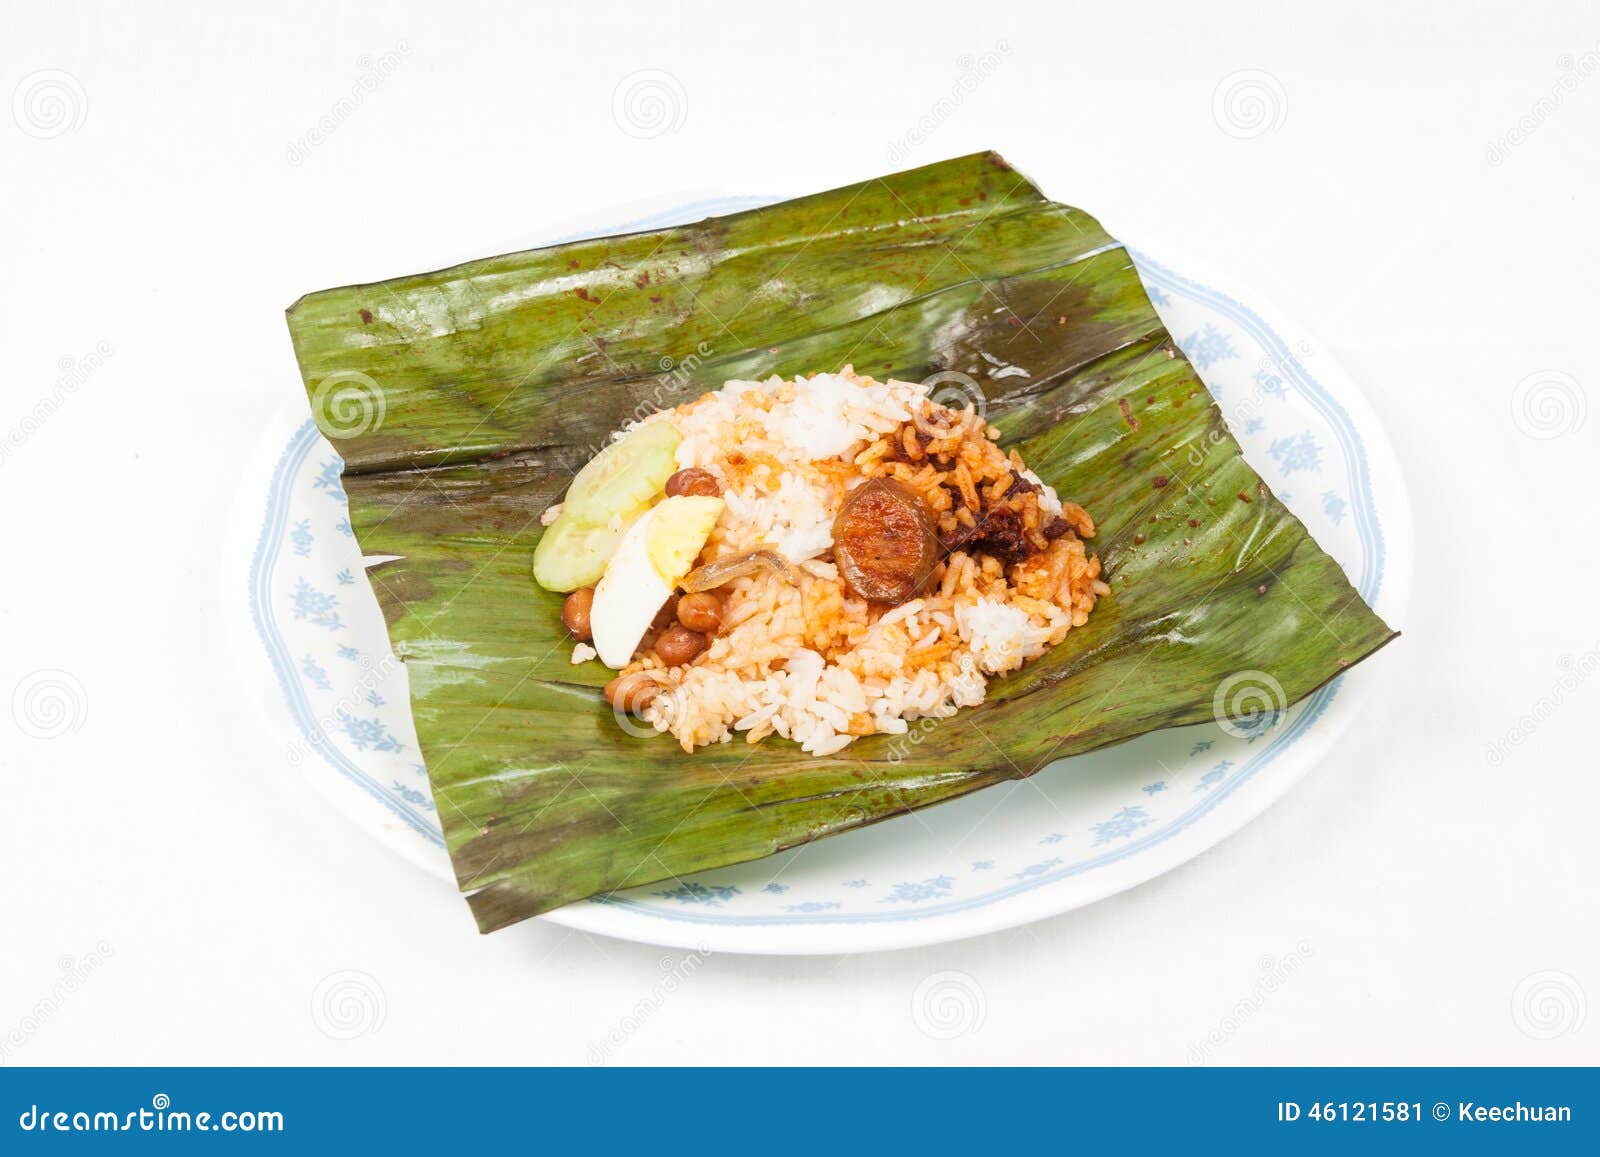 Original Traditional And Simple Nasi Lemak In Banana Leaf Stock Image  Image of cooked, belacan 